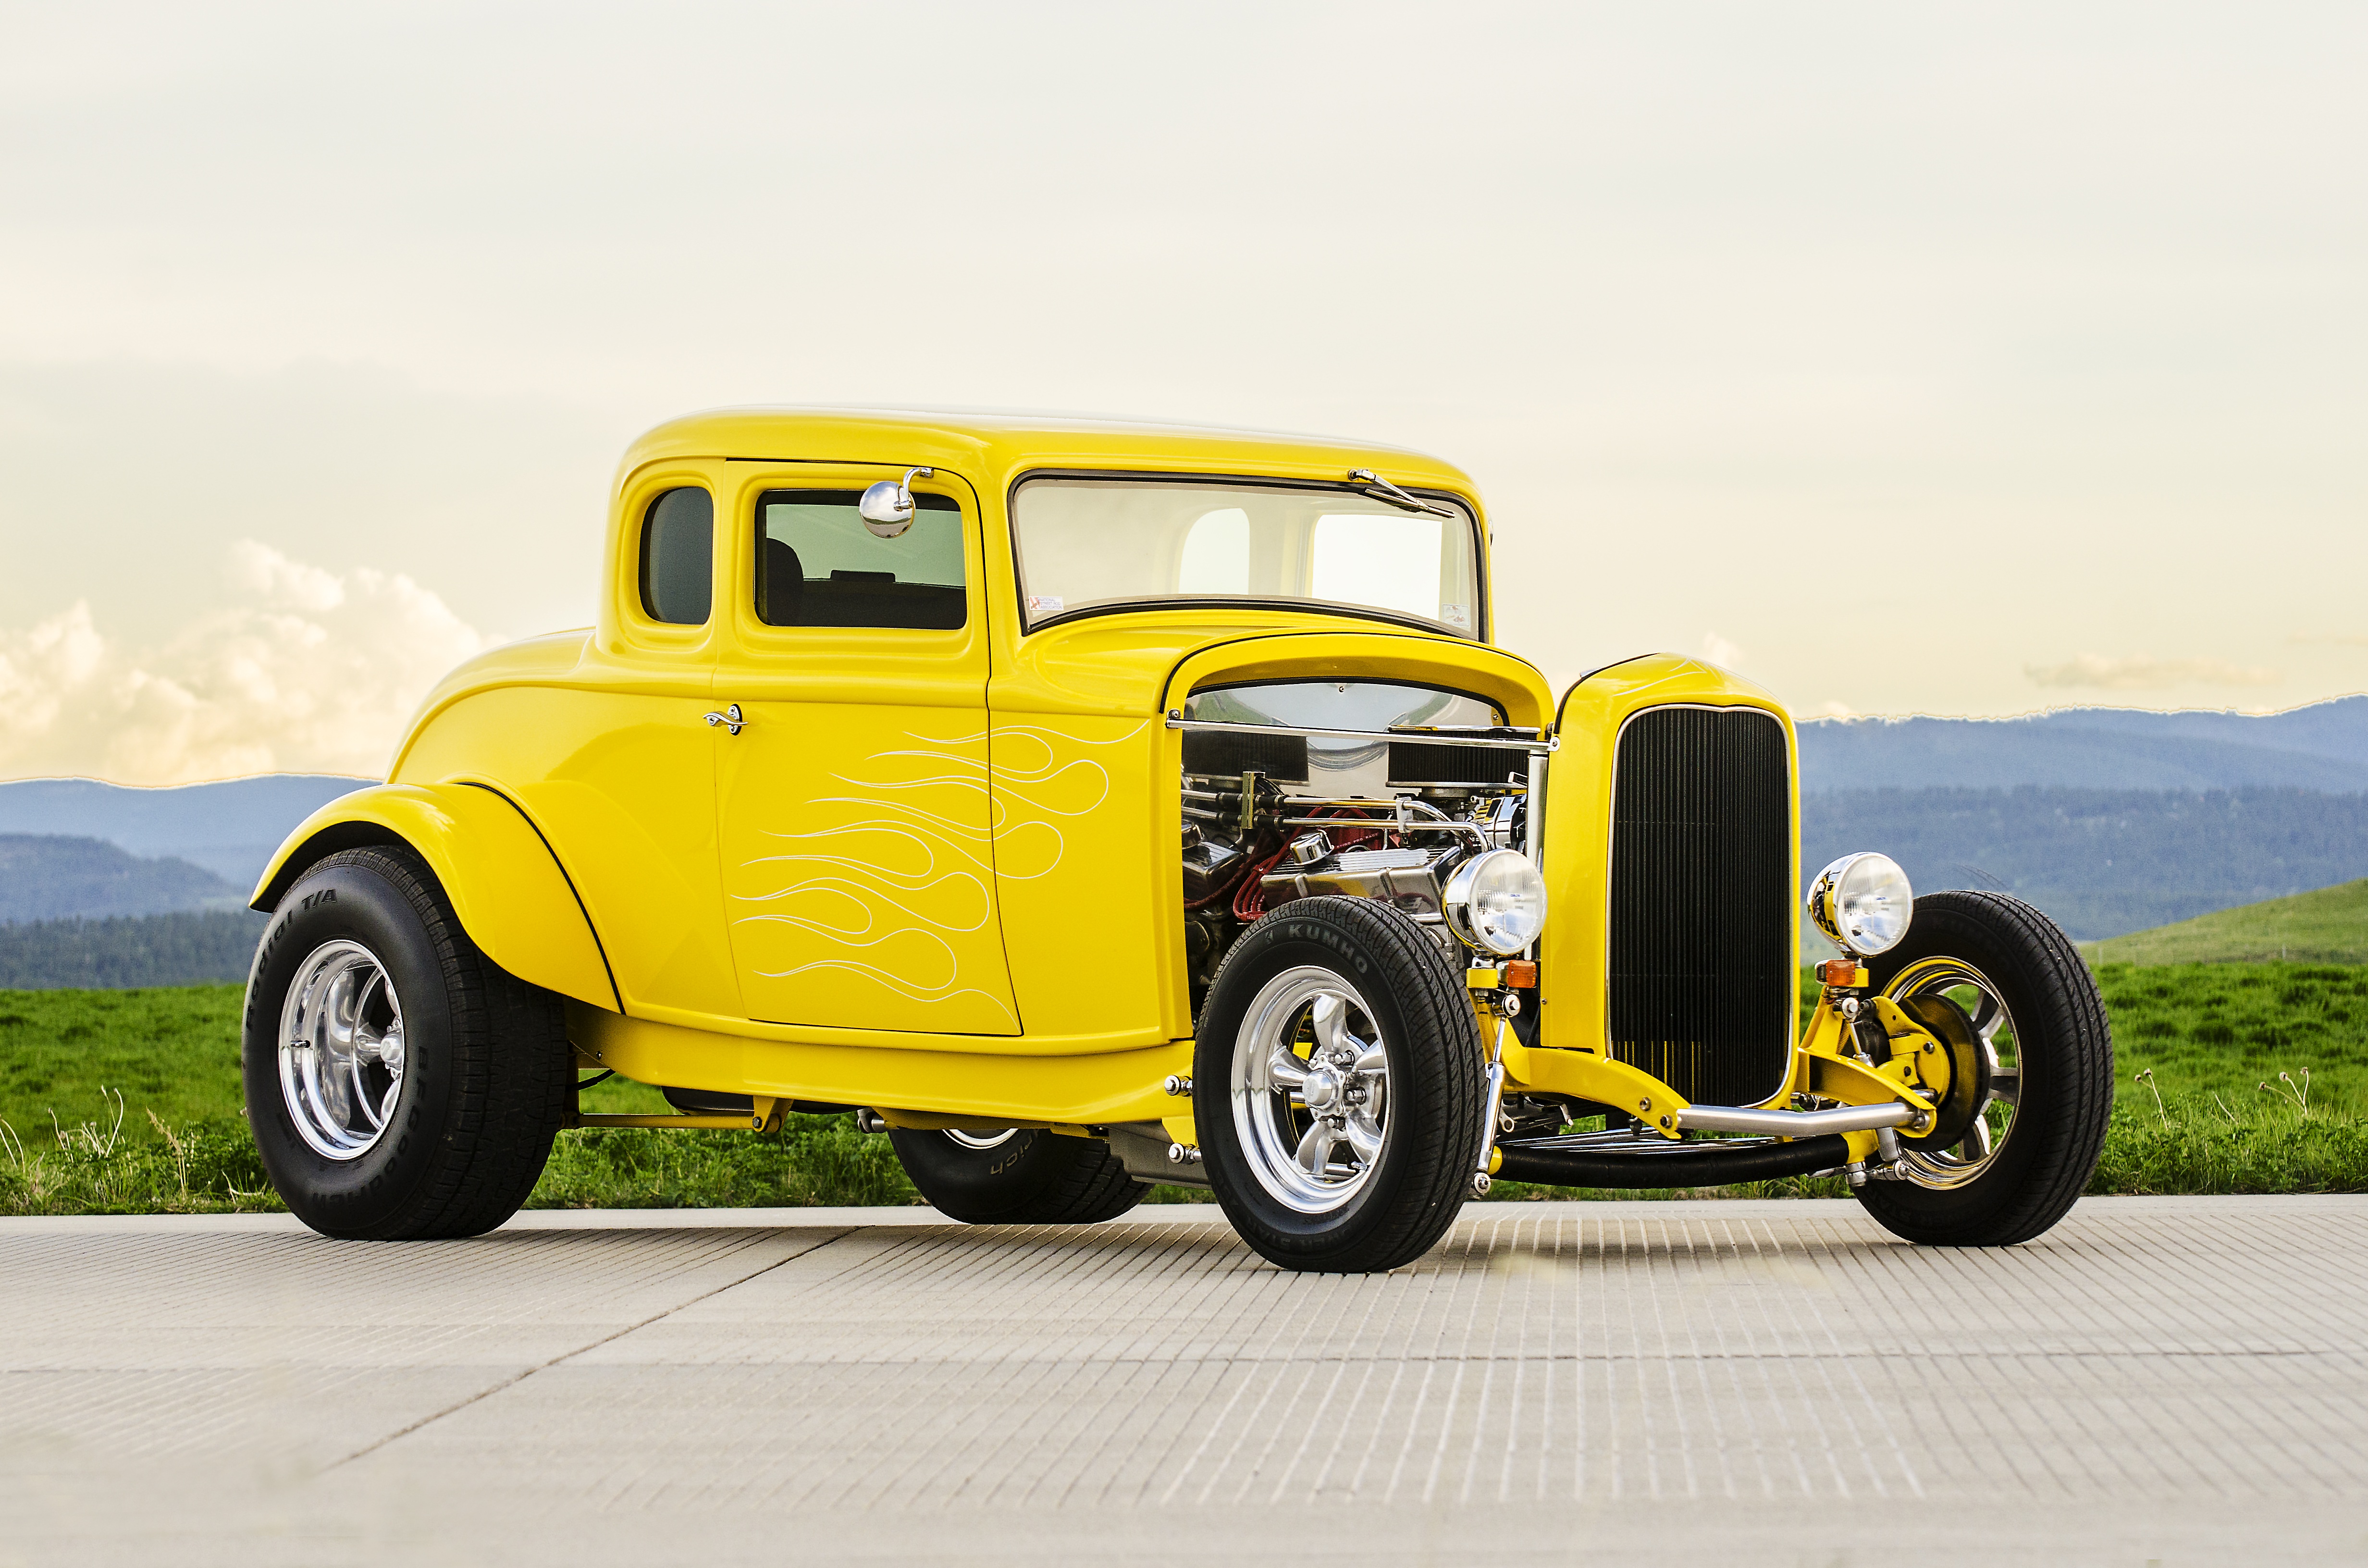 vintage car, vehicles, hot rod, classic car, old, yellow car